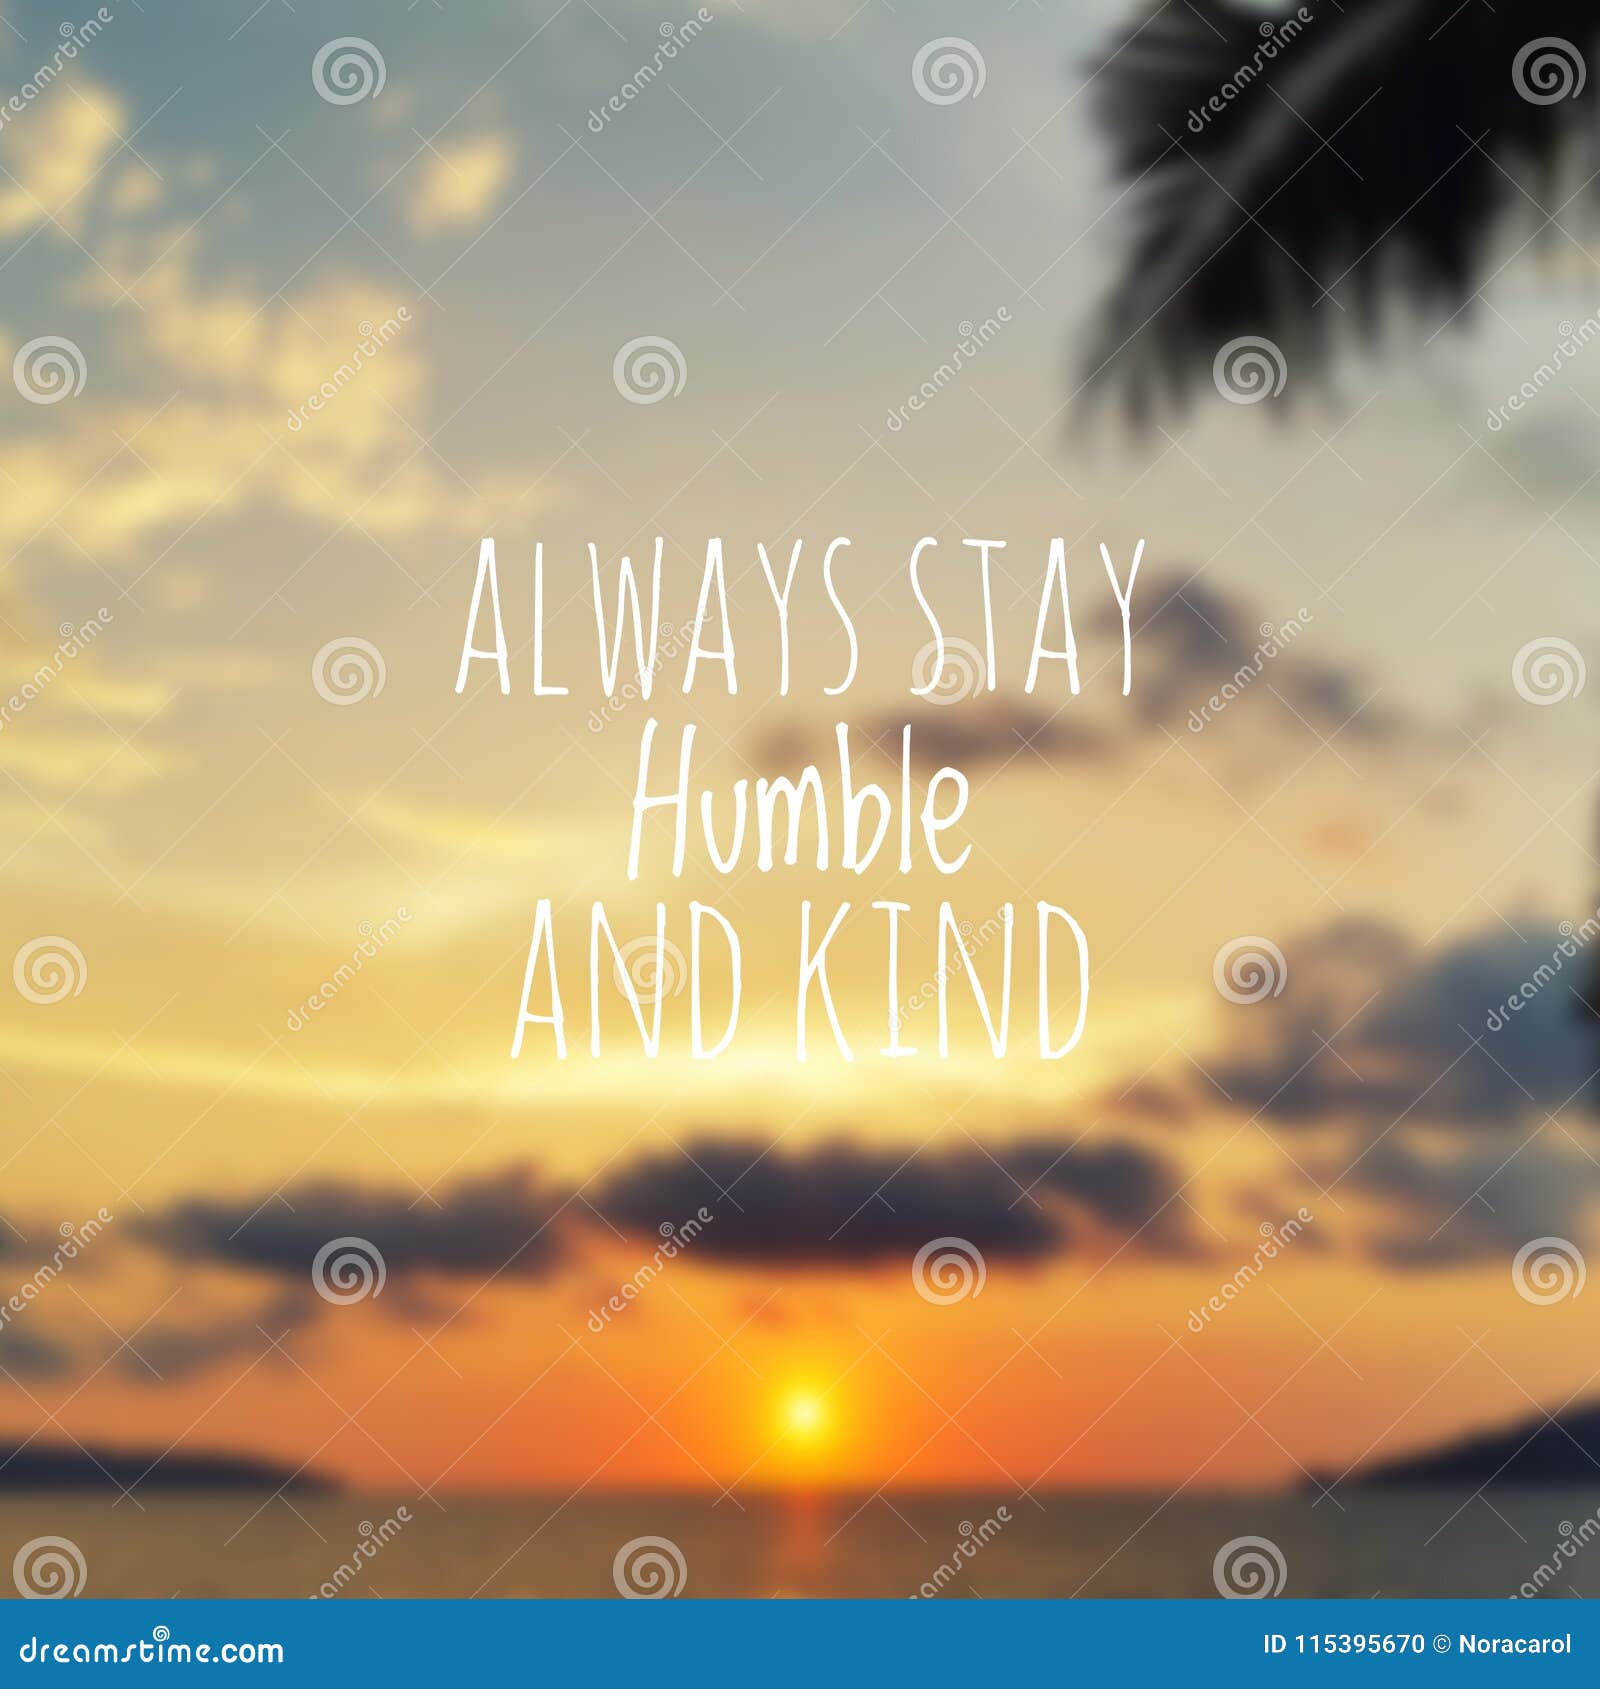 inspirational quote - always stay humble and kind